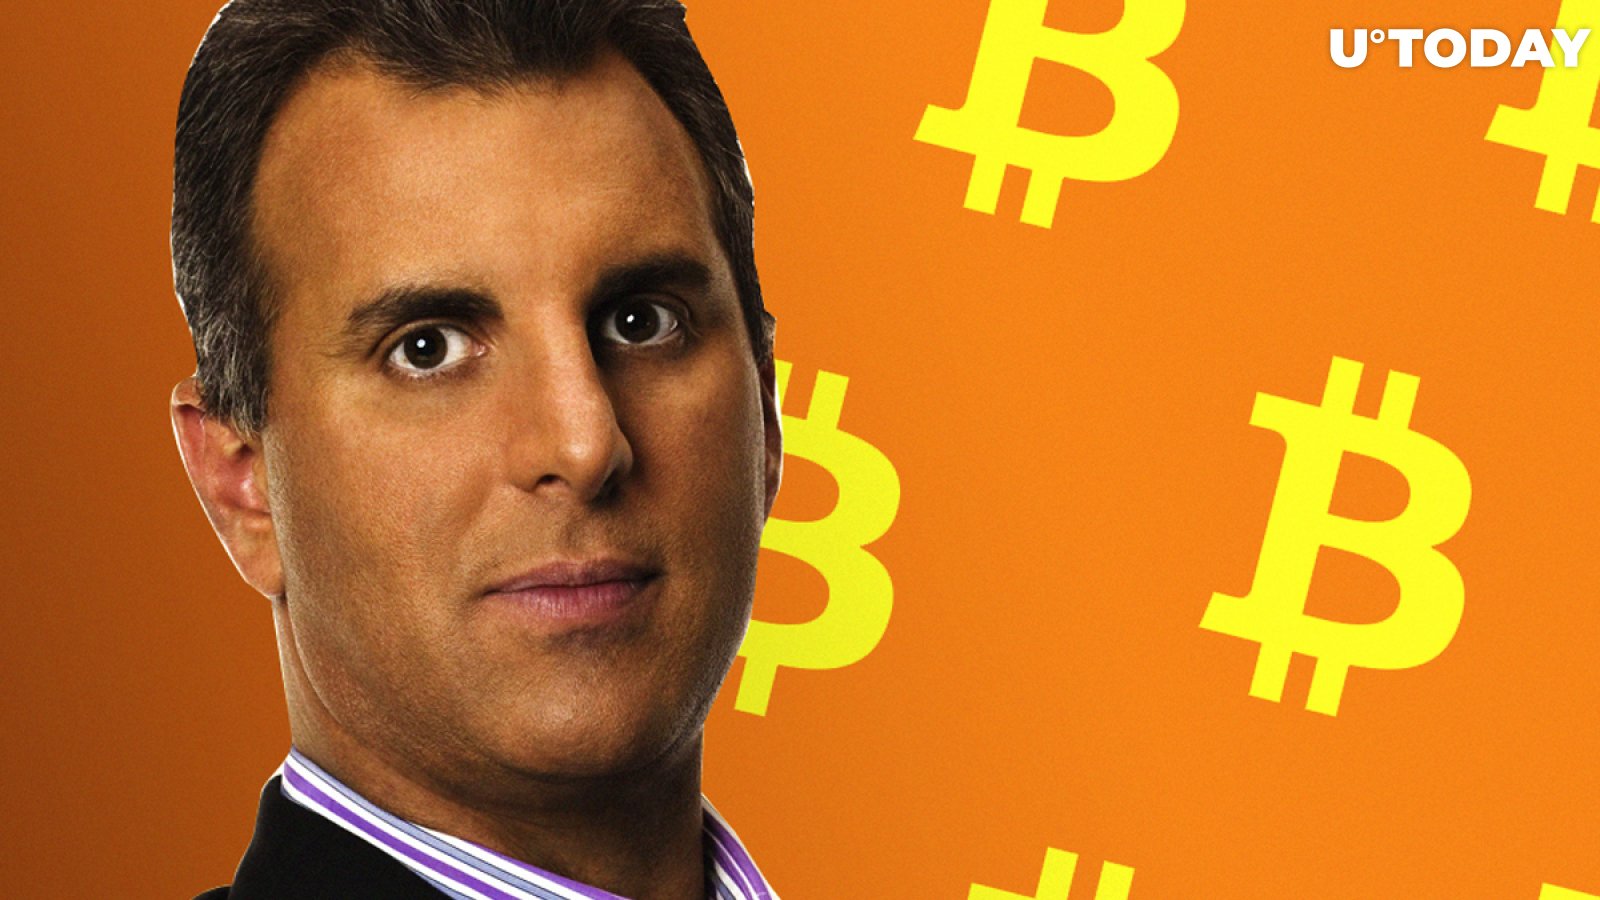 Bitcoin (BTC) Is the Victor in a World of Fiat Currencies: CNBC's Guy Adami